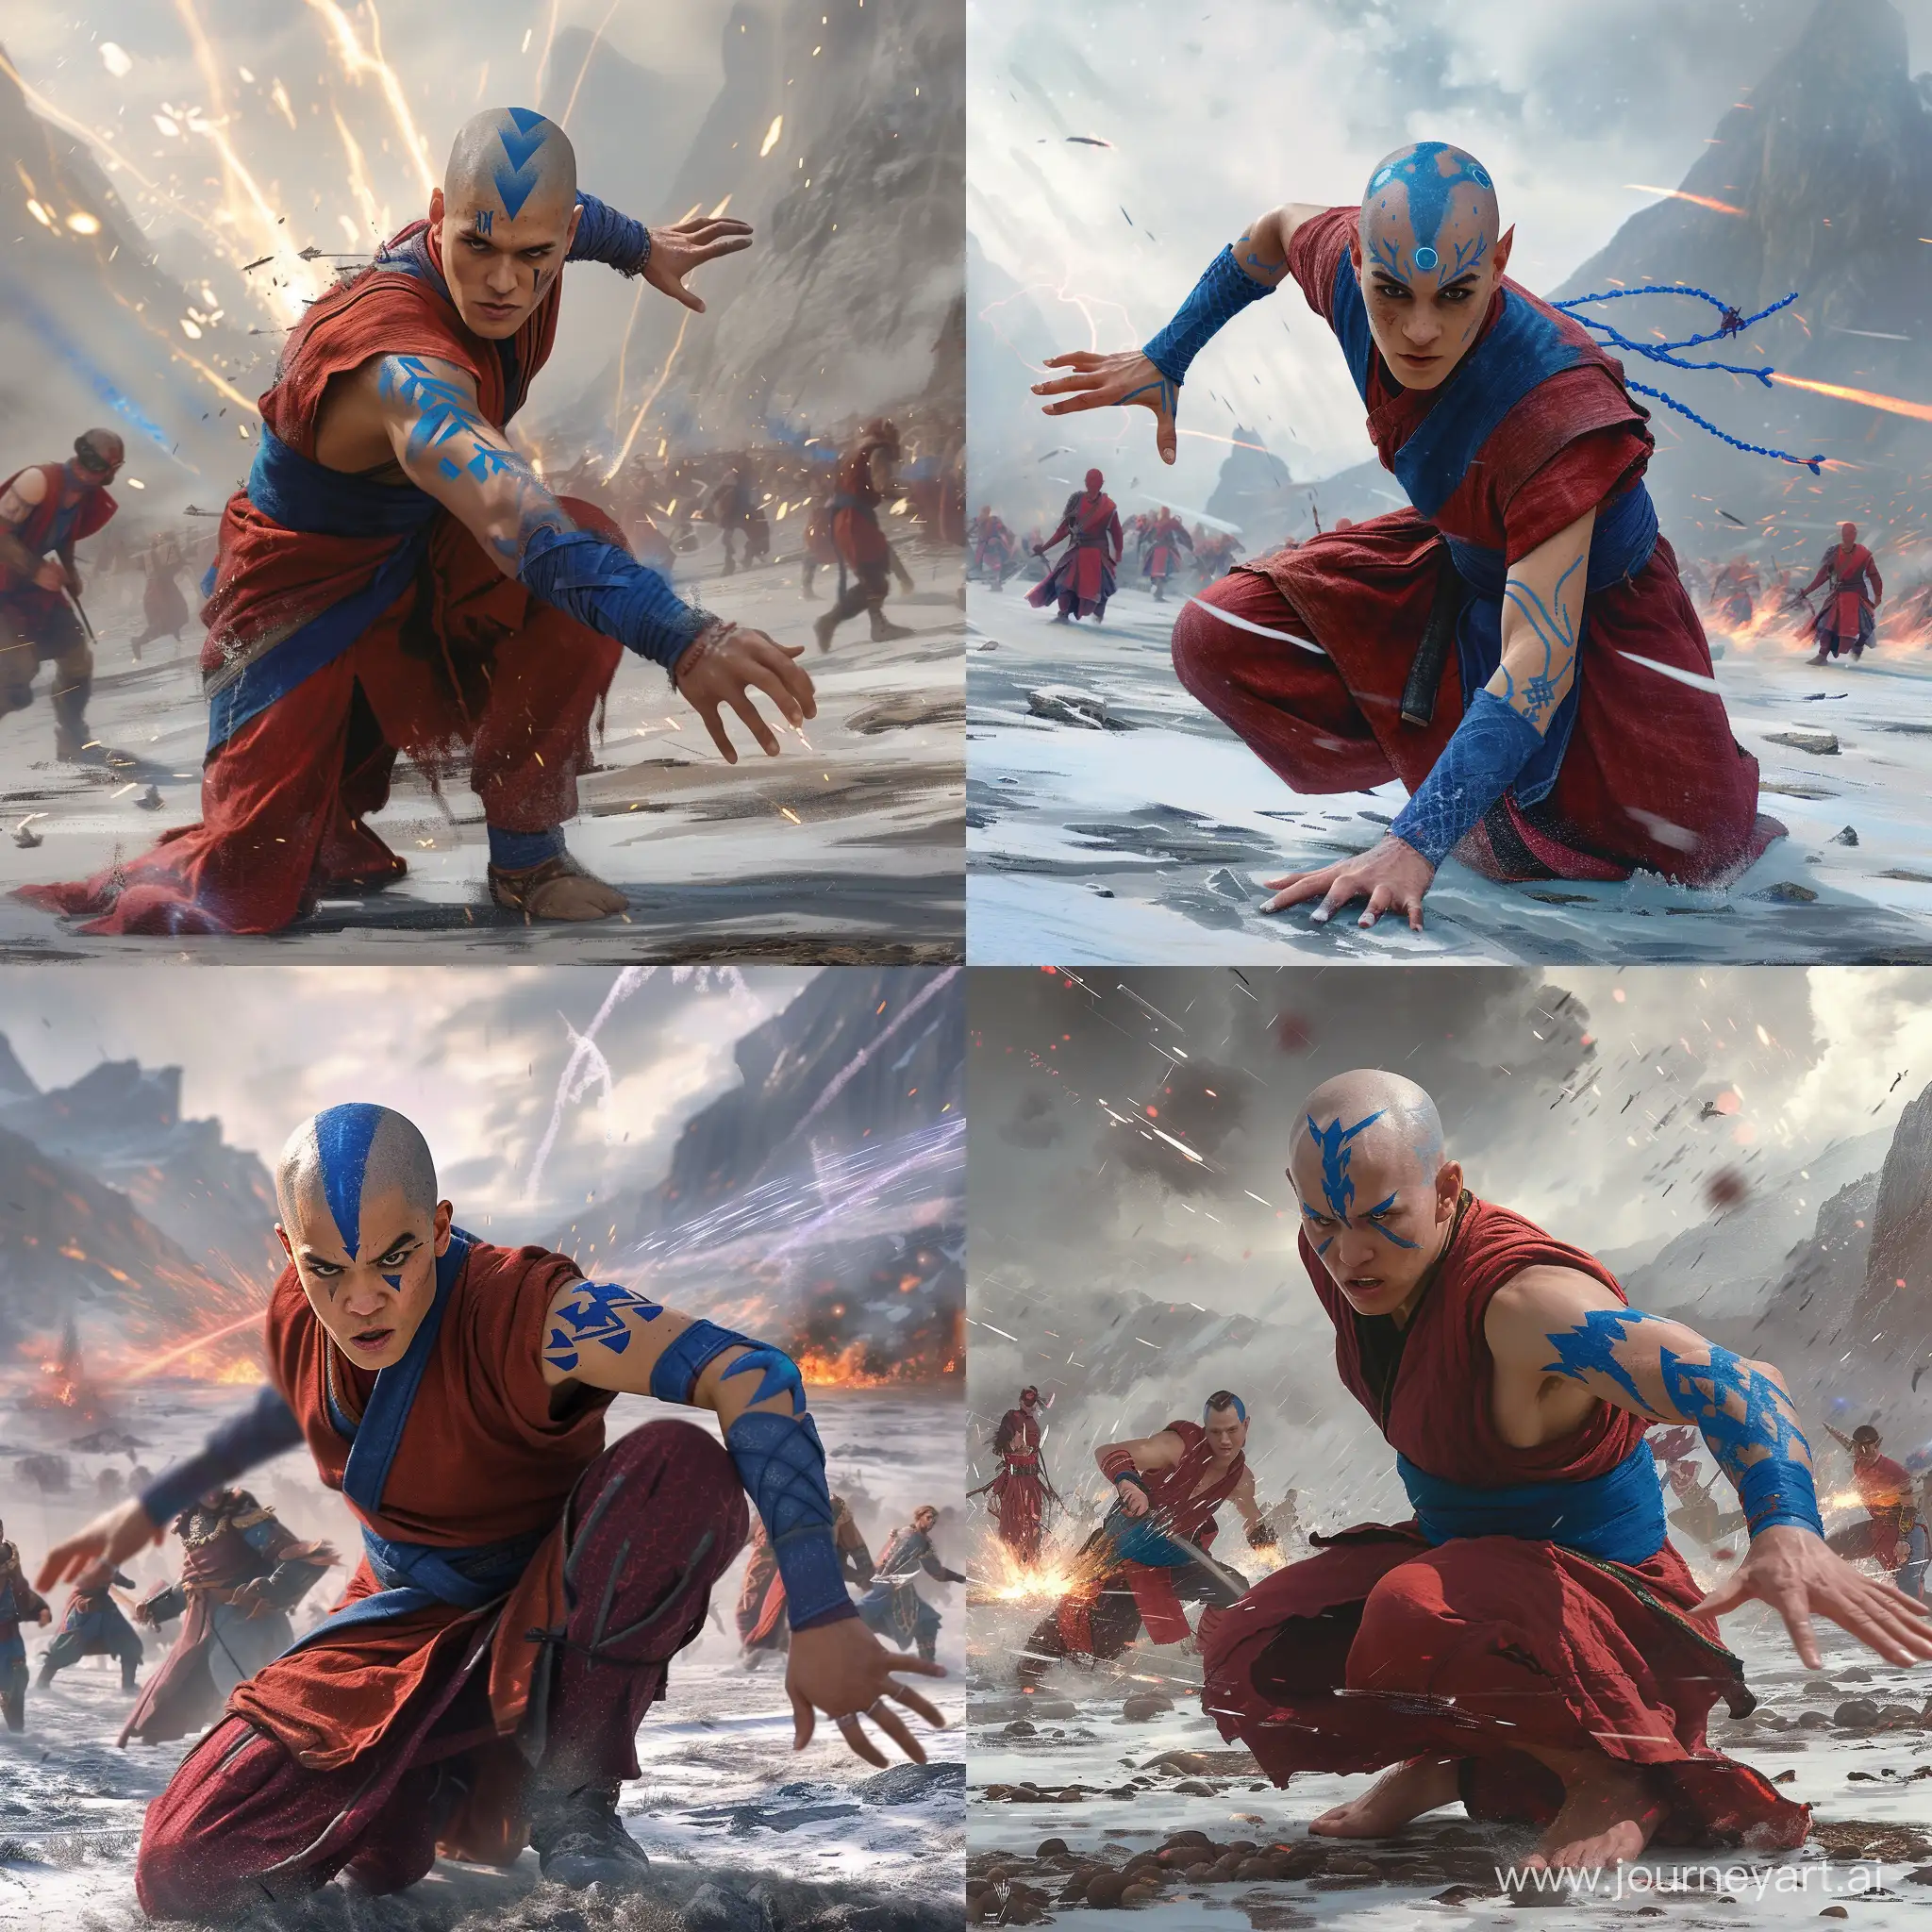 intense and dynamic fantasy battle scene. At the forefront, there's a character who appears to be a warrior or mage with distinctive blue arrow tattoos on his bald head and similar blue markings on his arms and body. They are dressed in red and blue garments which suggest a mix of monk-like and combat-oriented attire.

The warrior is crouching on one knee with one hand extended forward in a gesture that seems like they're either controlling or about to unleash some form of mystical power. Their expression is one of deep focus or determination.

In the background, multiple individuals are engaged in what looks to be a large-scale conflict, indicating that this character is possibly a key figure within this skirmish. The atmosphere is cold and bleak, suggested by the snow-covered ground and the mountains in the distance. The sky is tumultuous with a mix of dark clouds and streaks of what could be either lava or magical energy descending upon the battlefield.

The overall aesthetic, including the costumes and the presence of magic, hints that this image could be from a high fantasy genre, likely a film, game, or a promotional concept for a story set in such a universe.